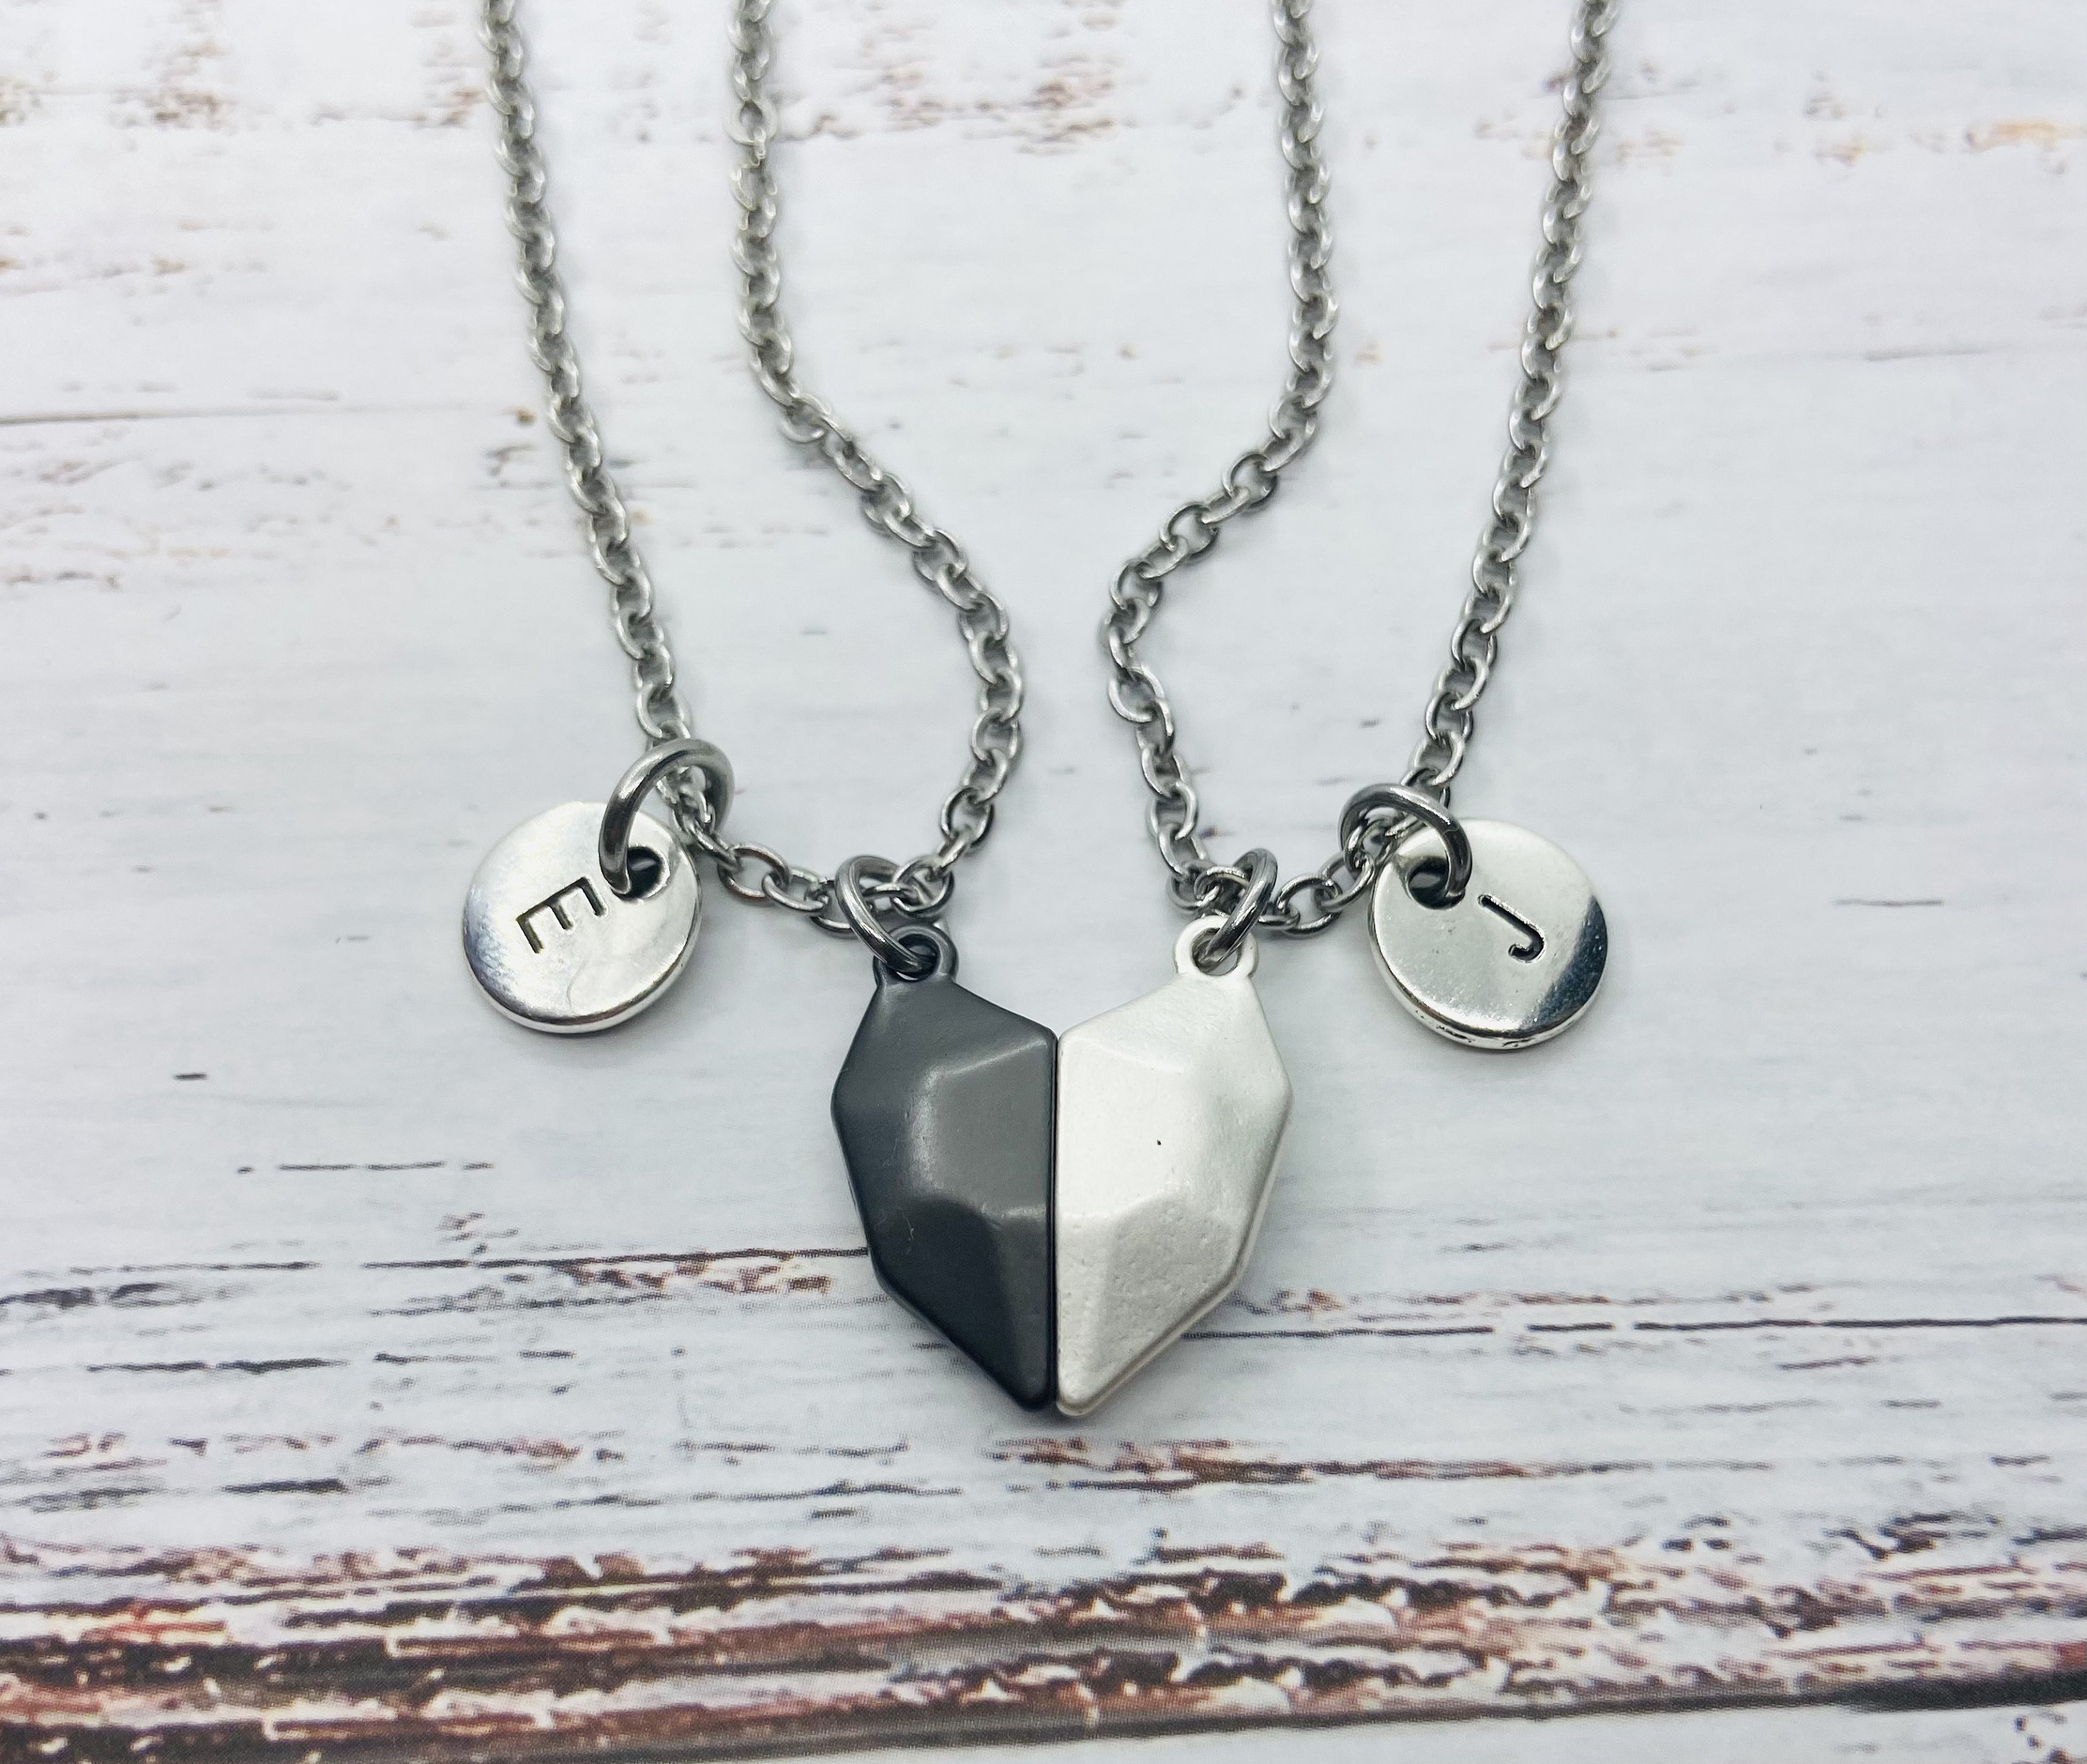 Buy Magnetic Heart Necklace, Couple Necklace, Magnetic Couple Necklace,  Heart Necklace, Lover Necklace, Friendship Necklace Online in India - Etsy